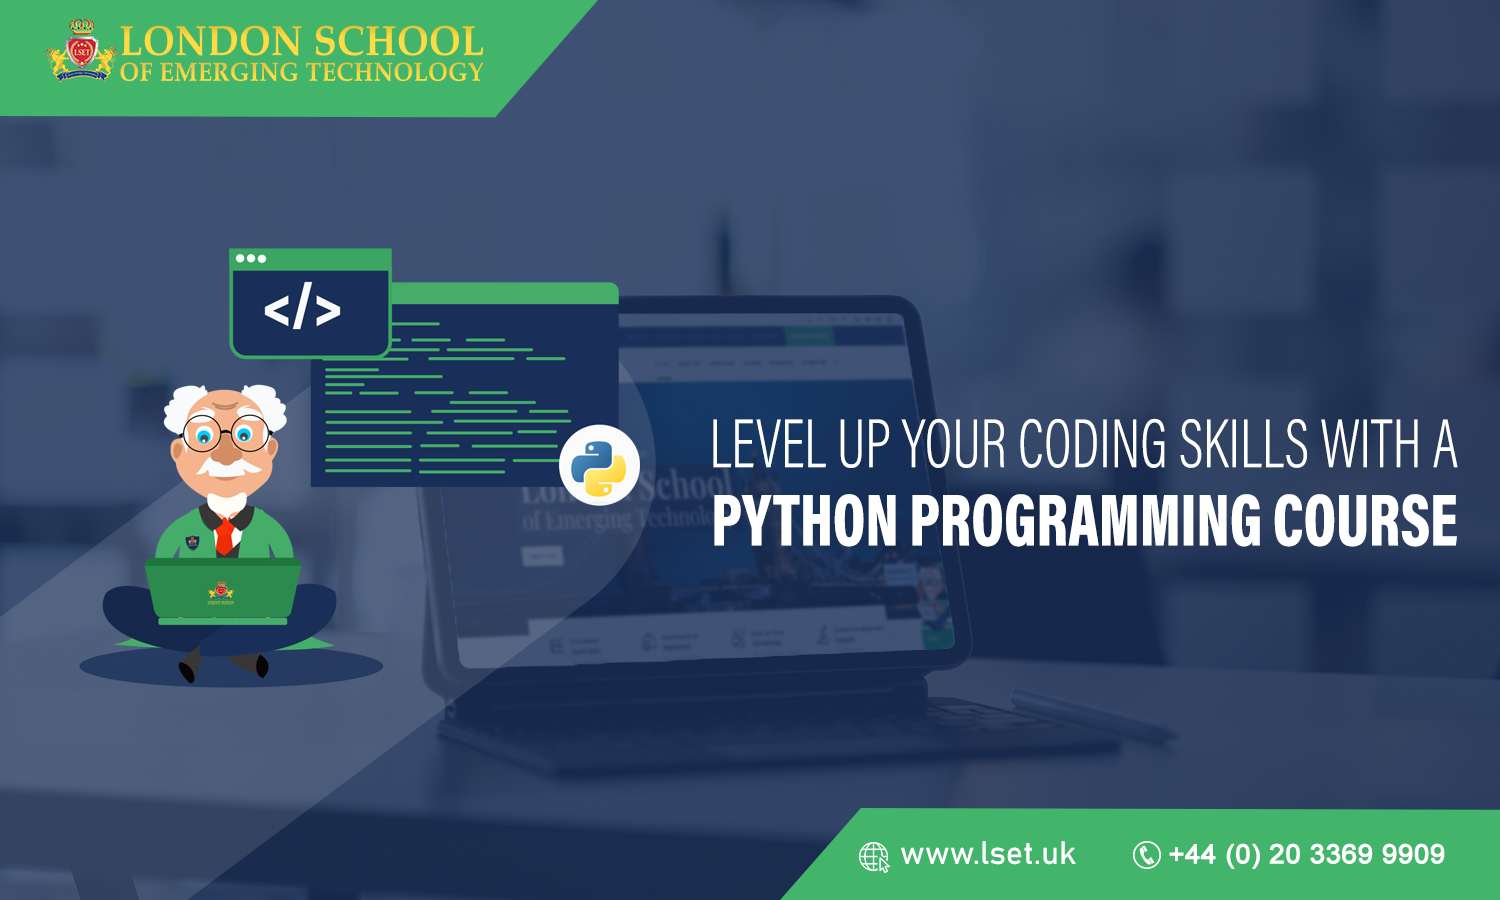 Level Up Your Coding Skills with a Python Programming Course